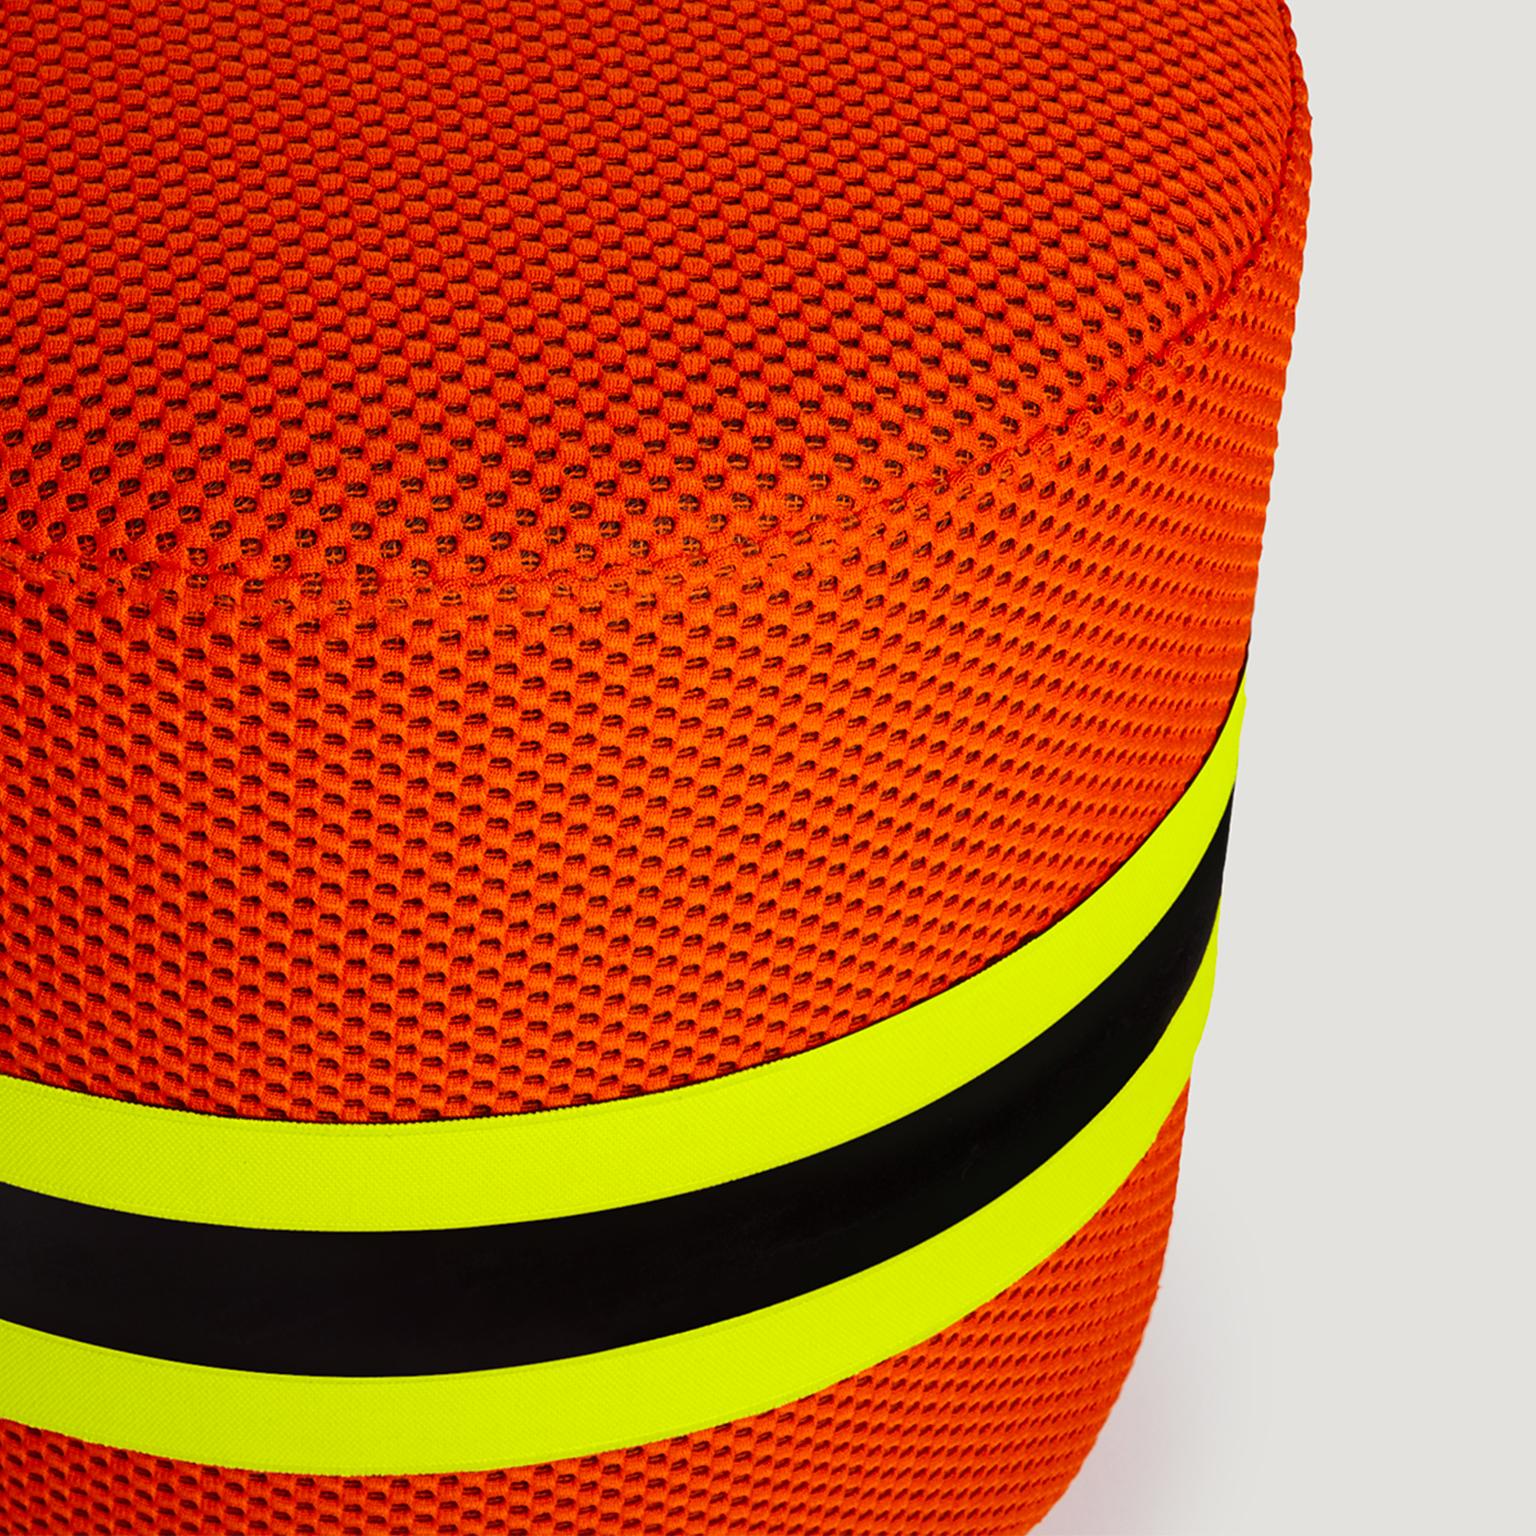 Stool with polyurethane base upholstered in Body Building fabric with elastic synthetic bands in neon yellow and black.
In “Body Building” the objects are dissected and studied, designed to elude the perception of the viewer, to discover a world